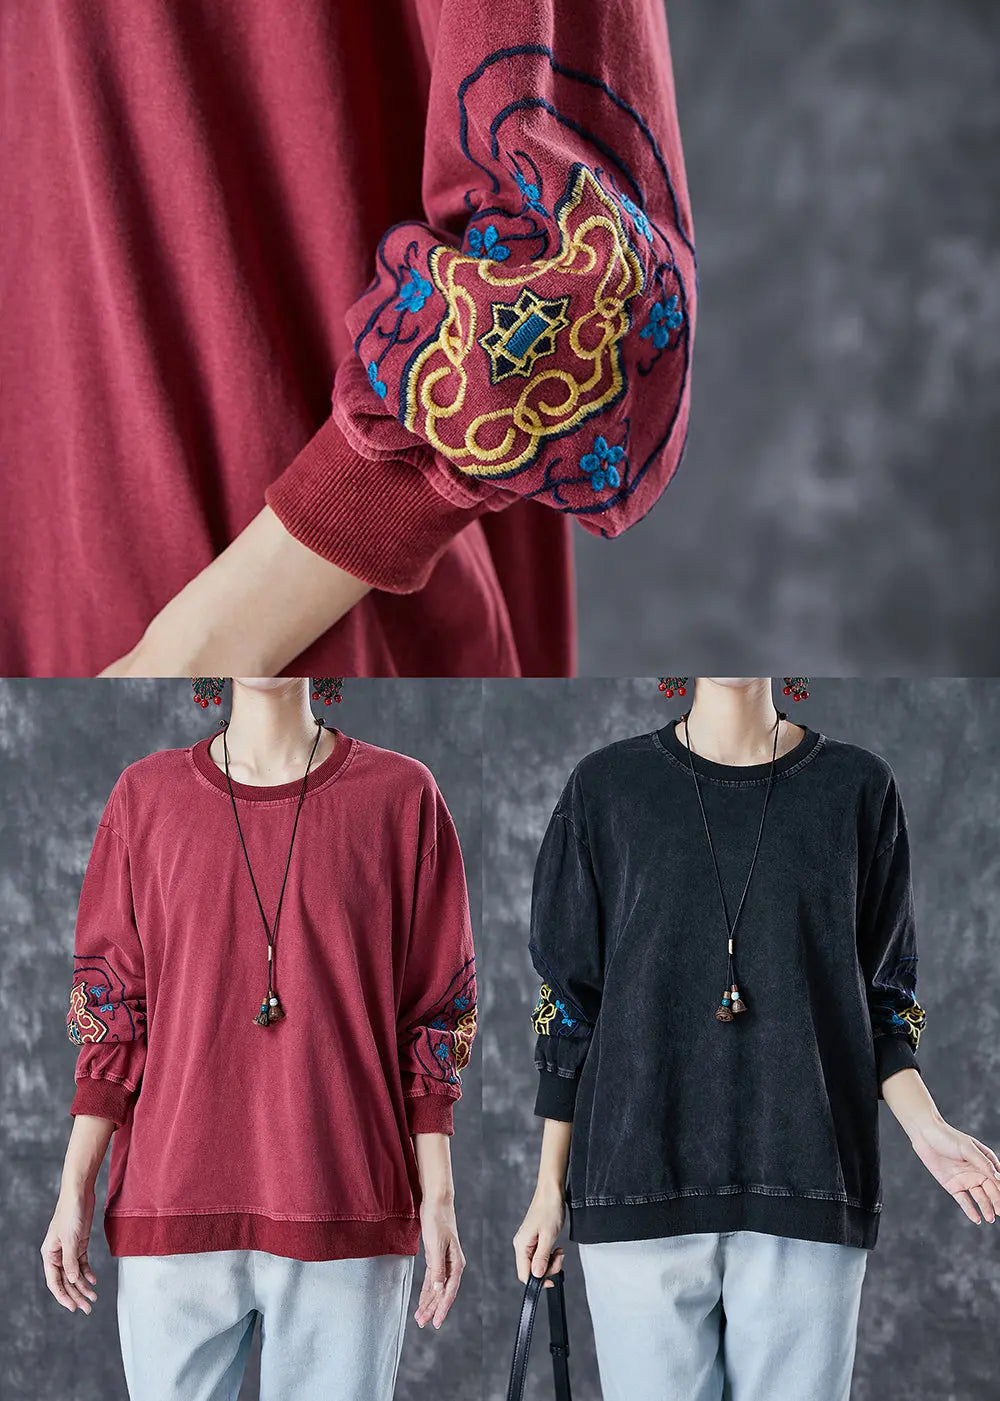 Style Dull Red Embroidered Cotton Loose Sweatshirts Top Fall Ada Fashion